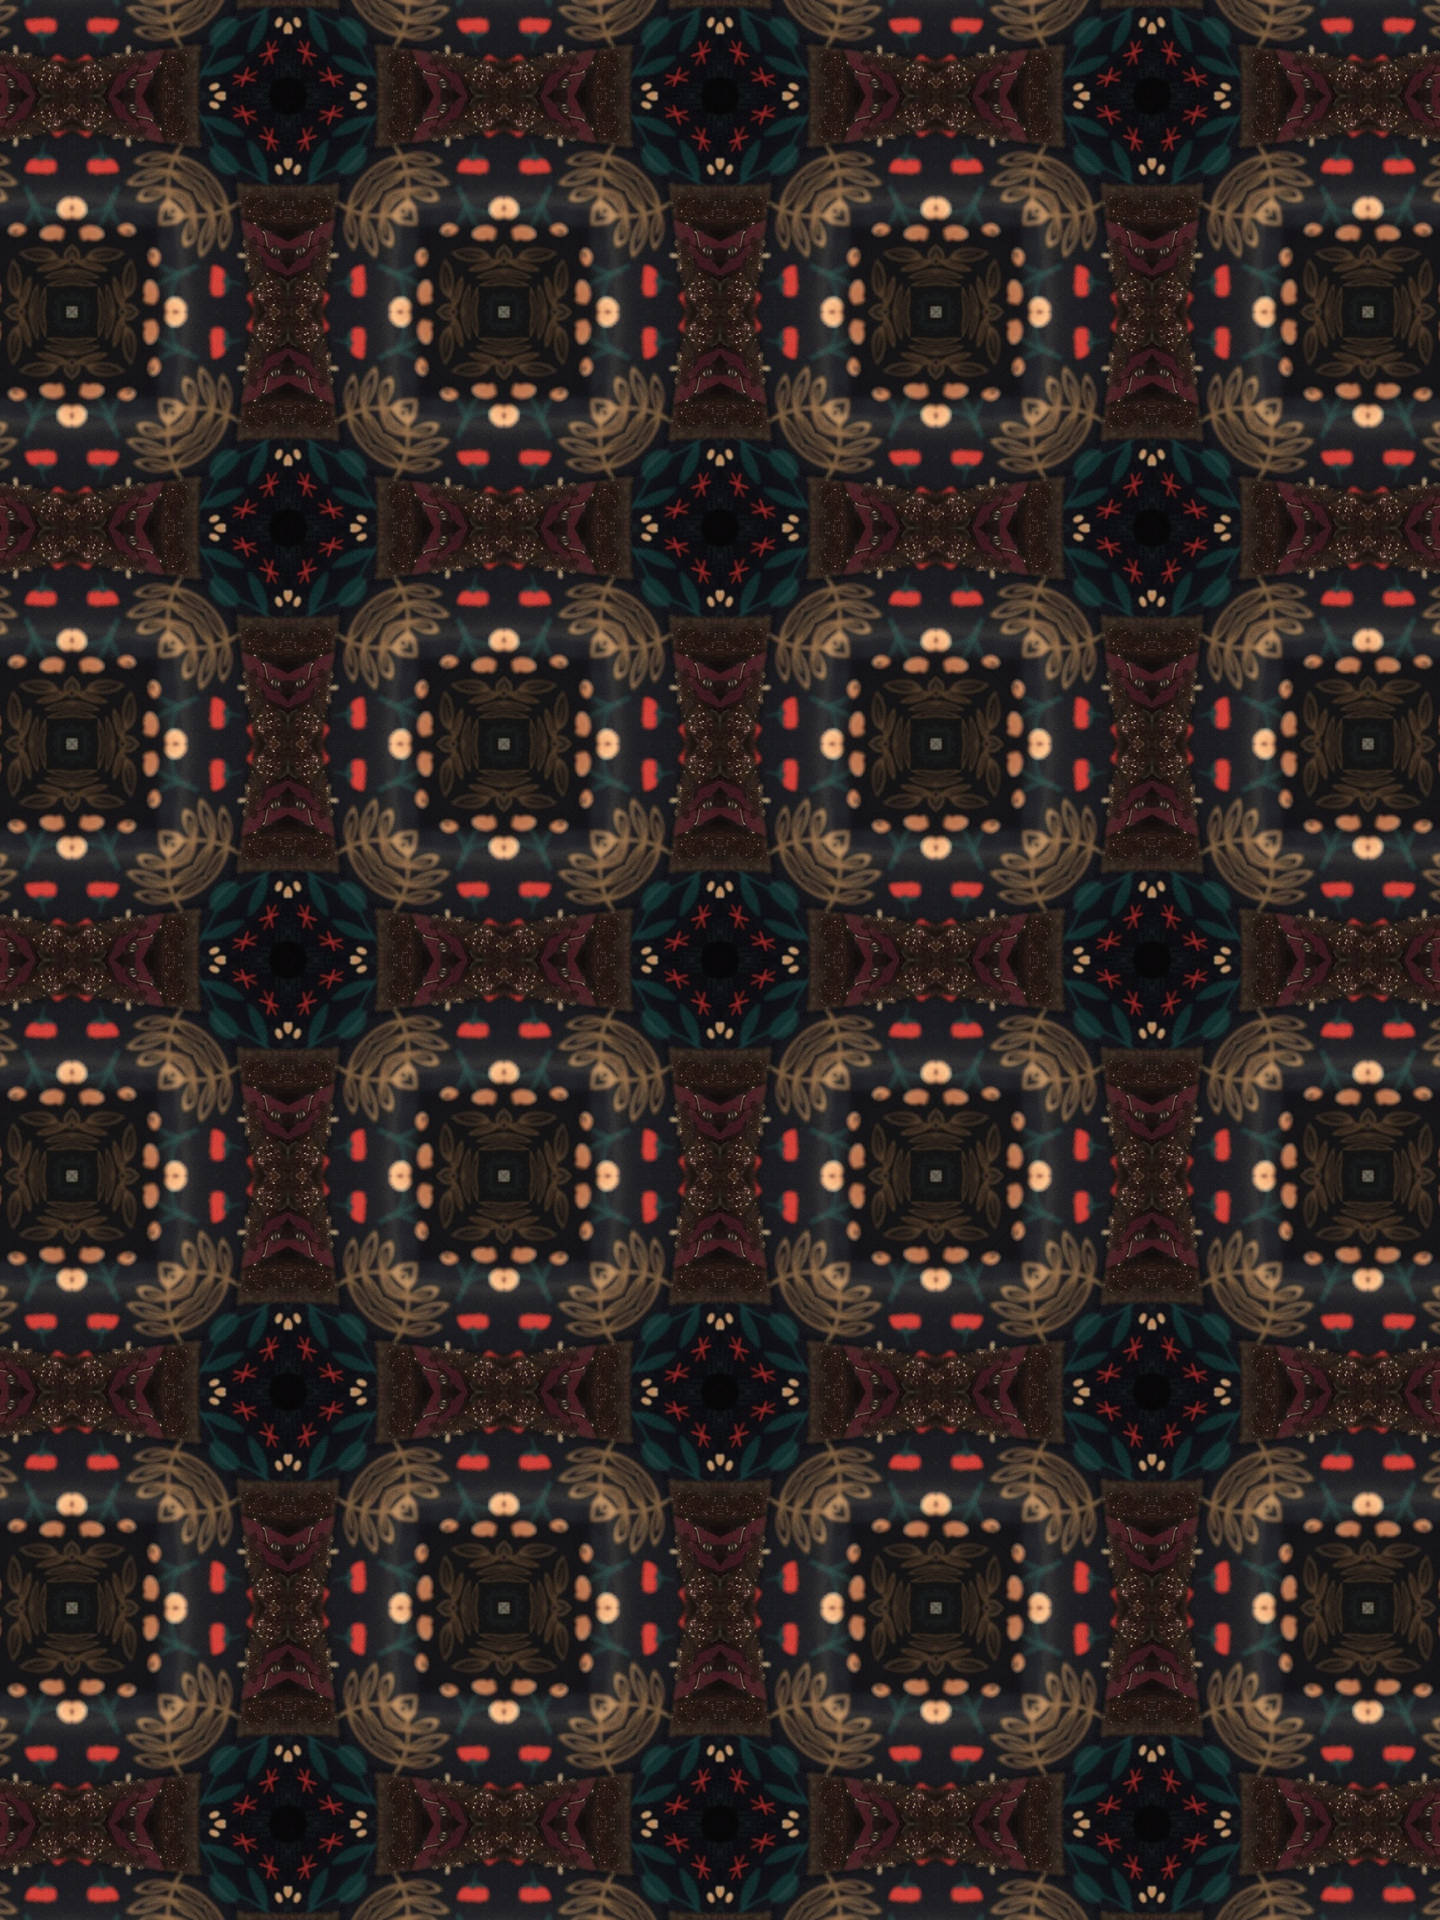 2448X3264 Pattern Wallpaper and Background